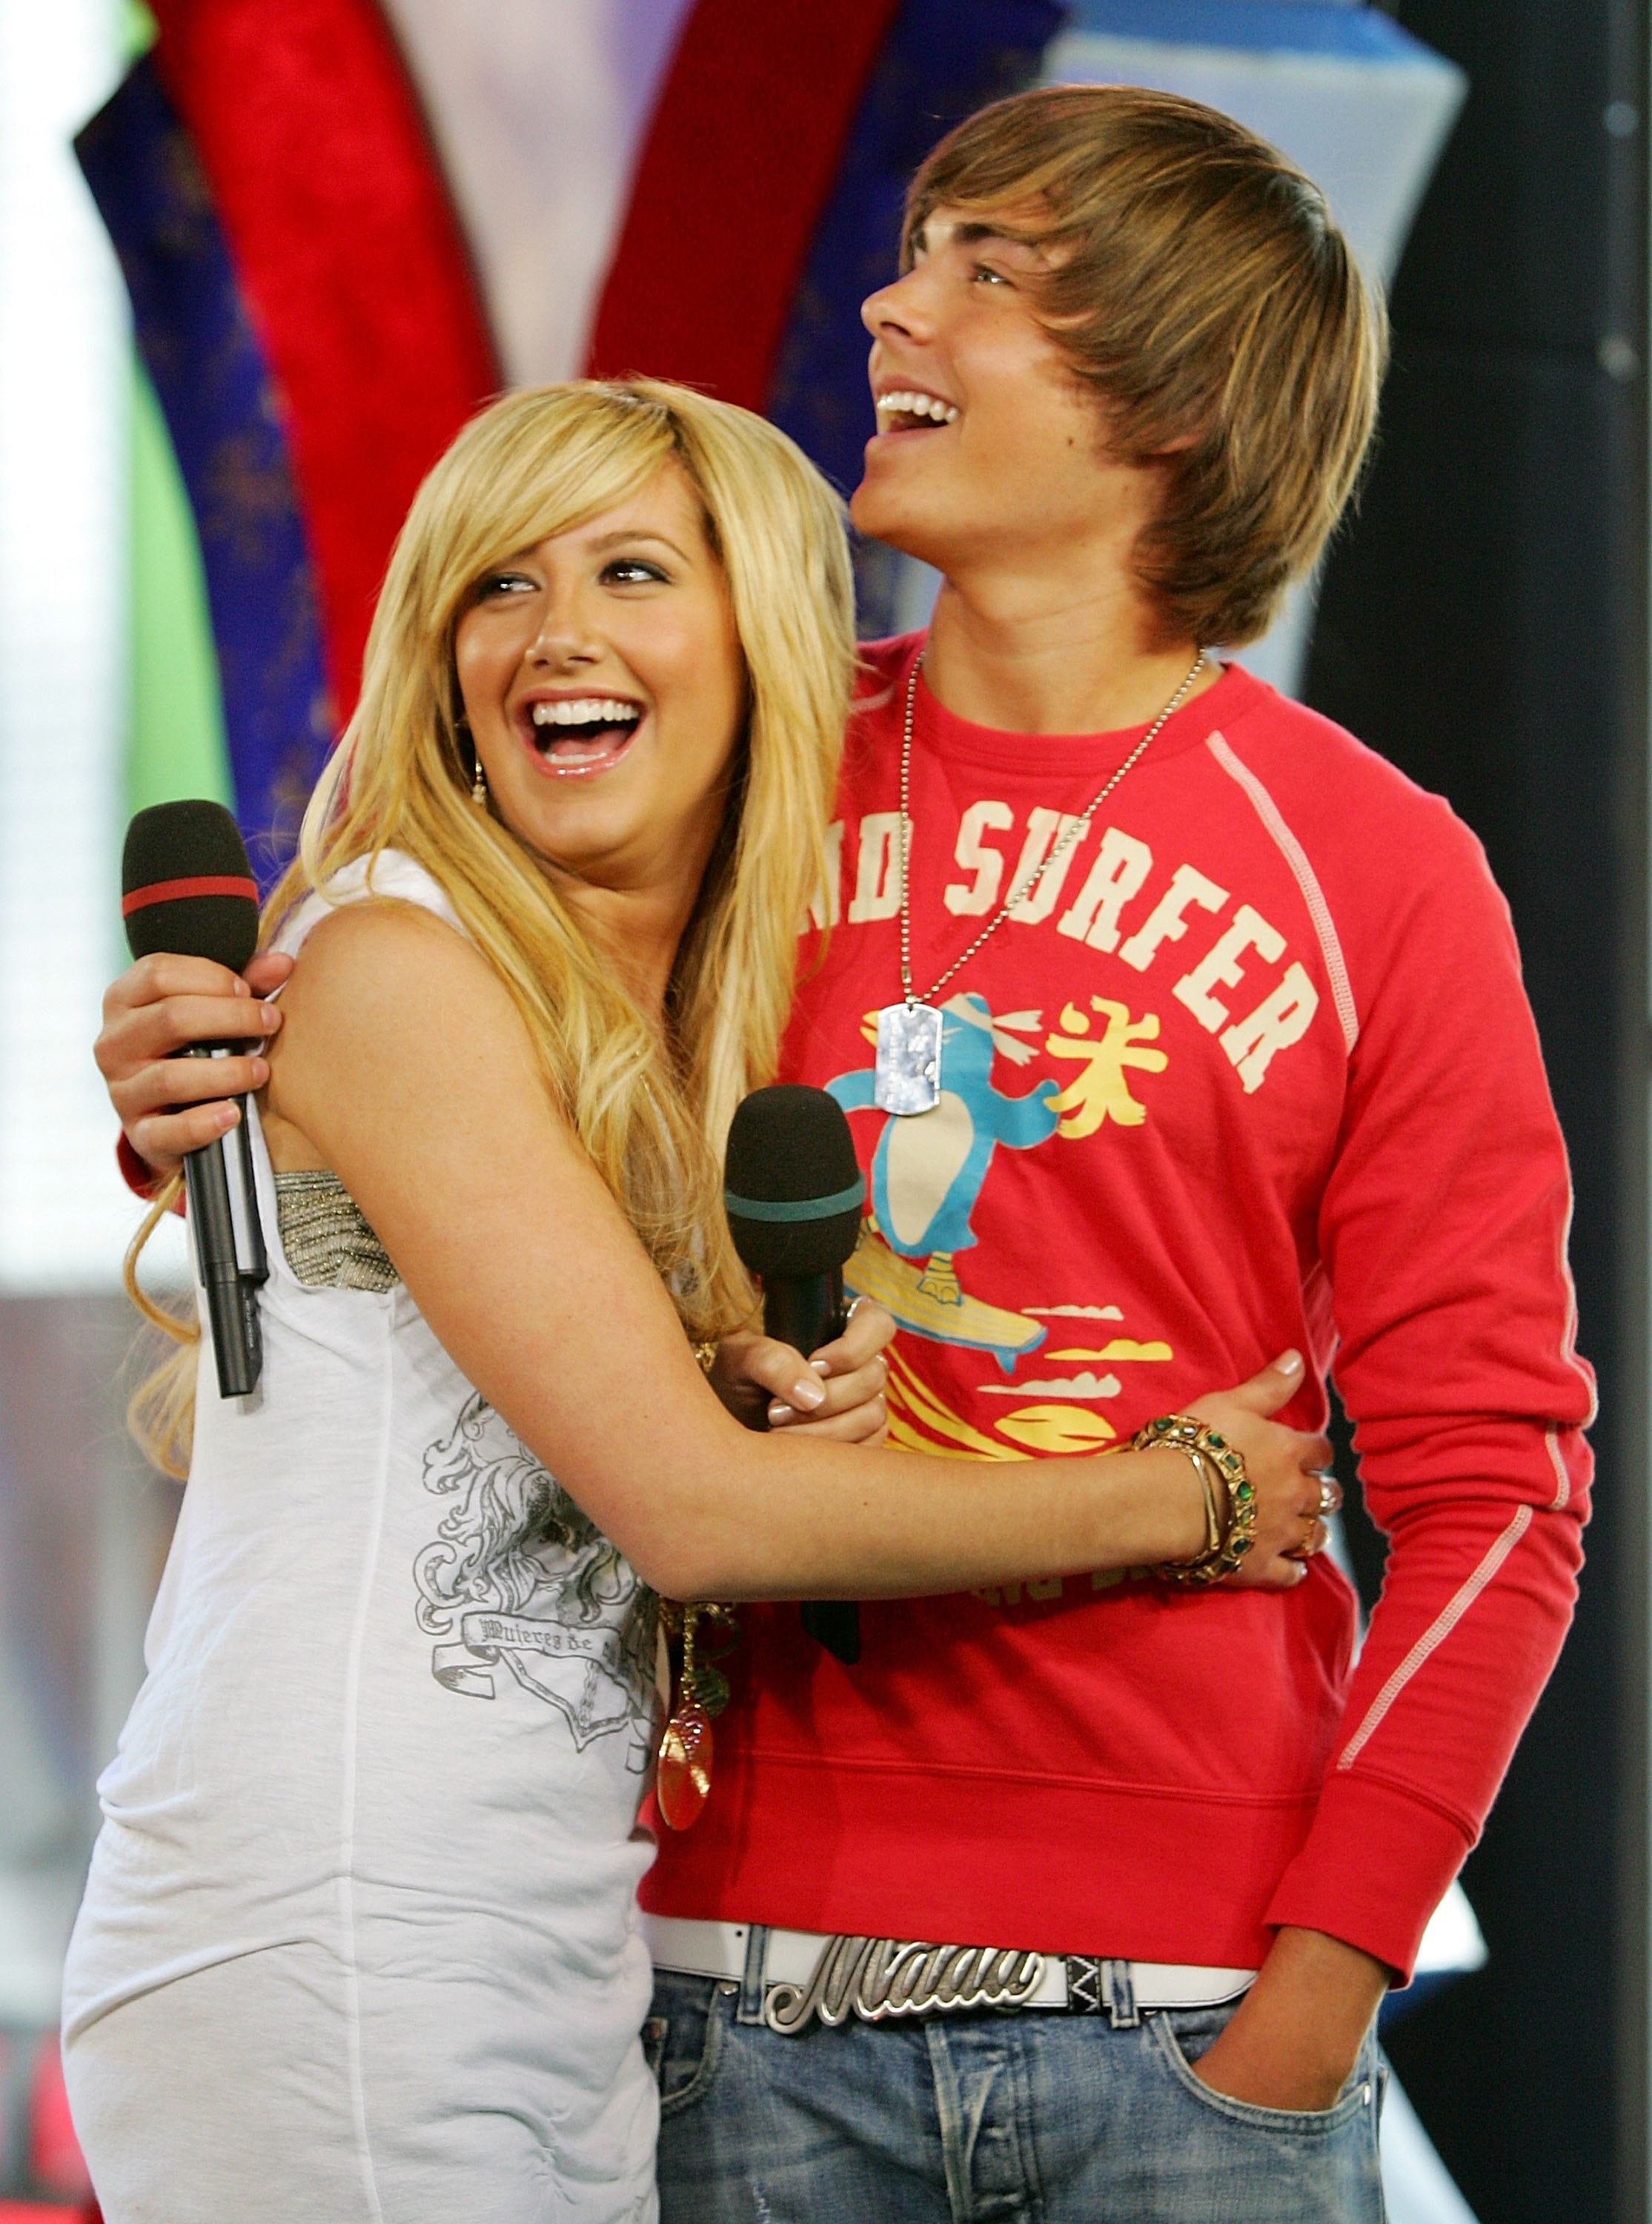 Zac and Ashley embrace during a TV appearance